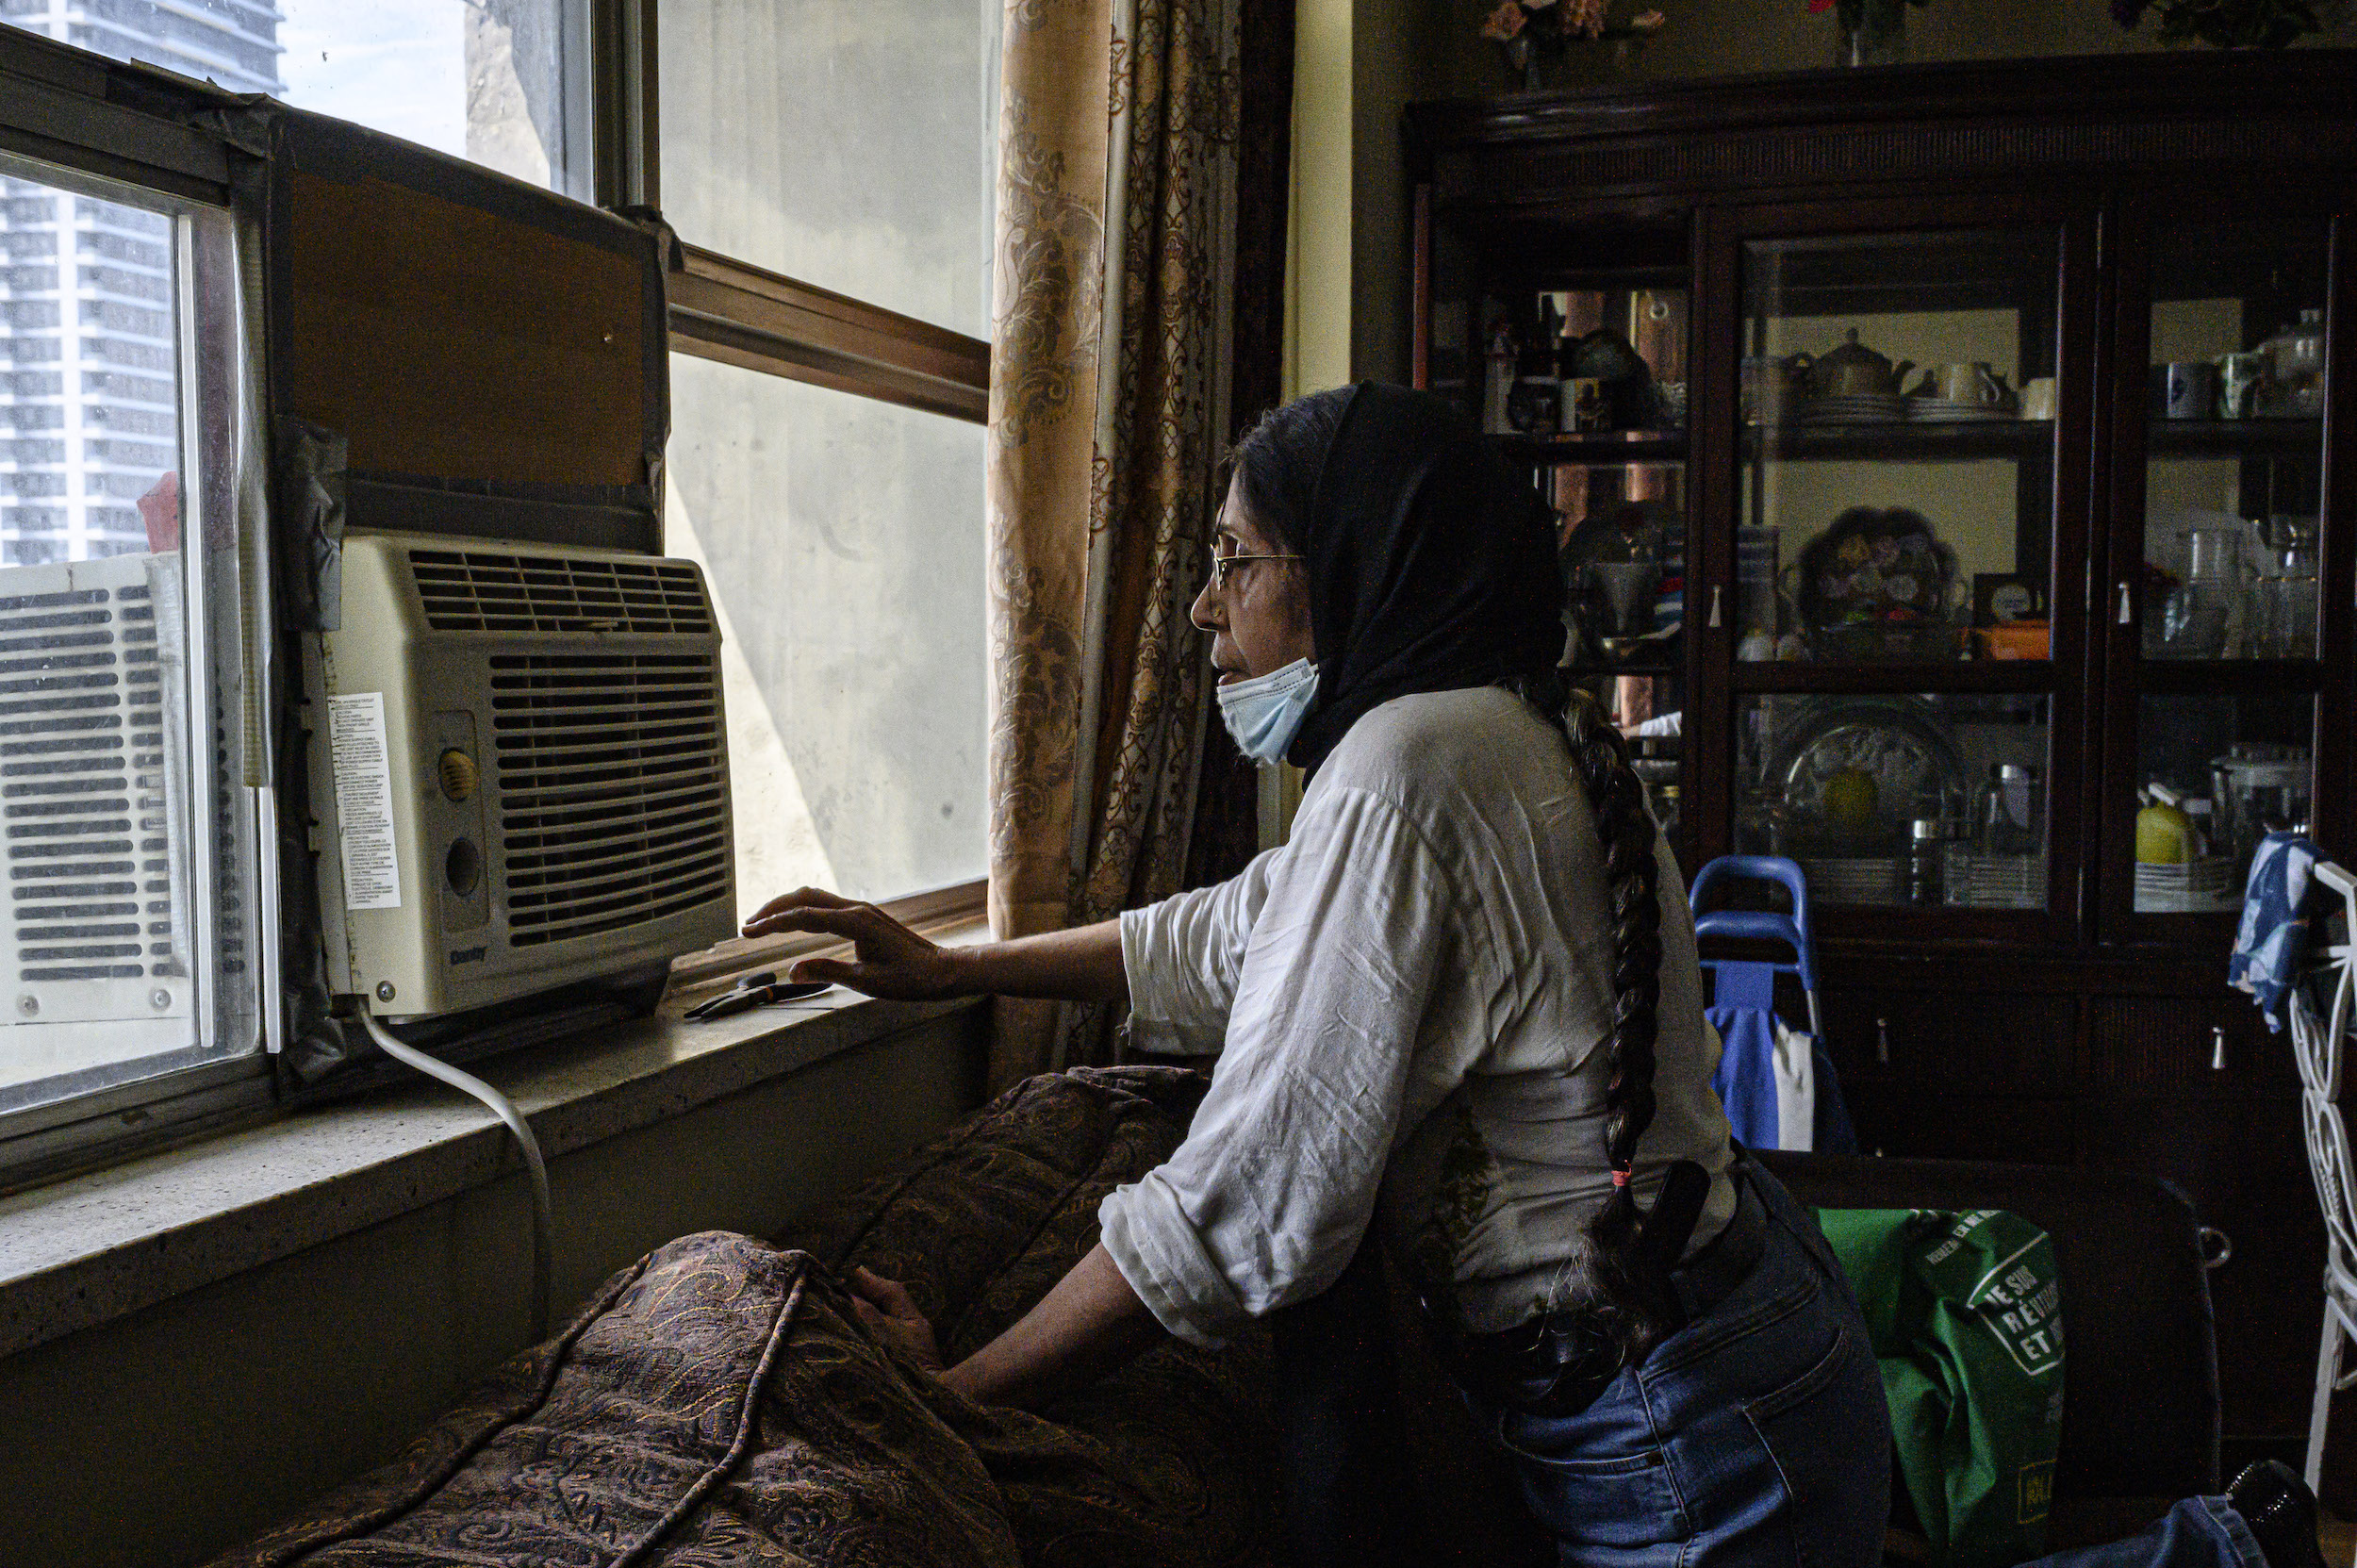 Shaheen Kausar, volunteer with Community Resilience to Extreme Weather (CREW), and resident of St. James Town, Toronto, turns on the air conditioner in her unit.